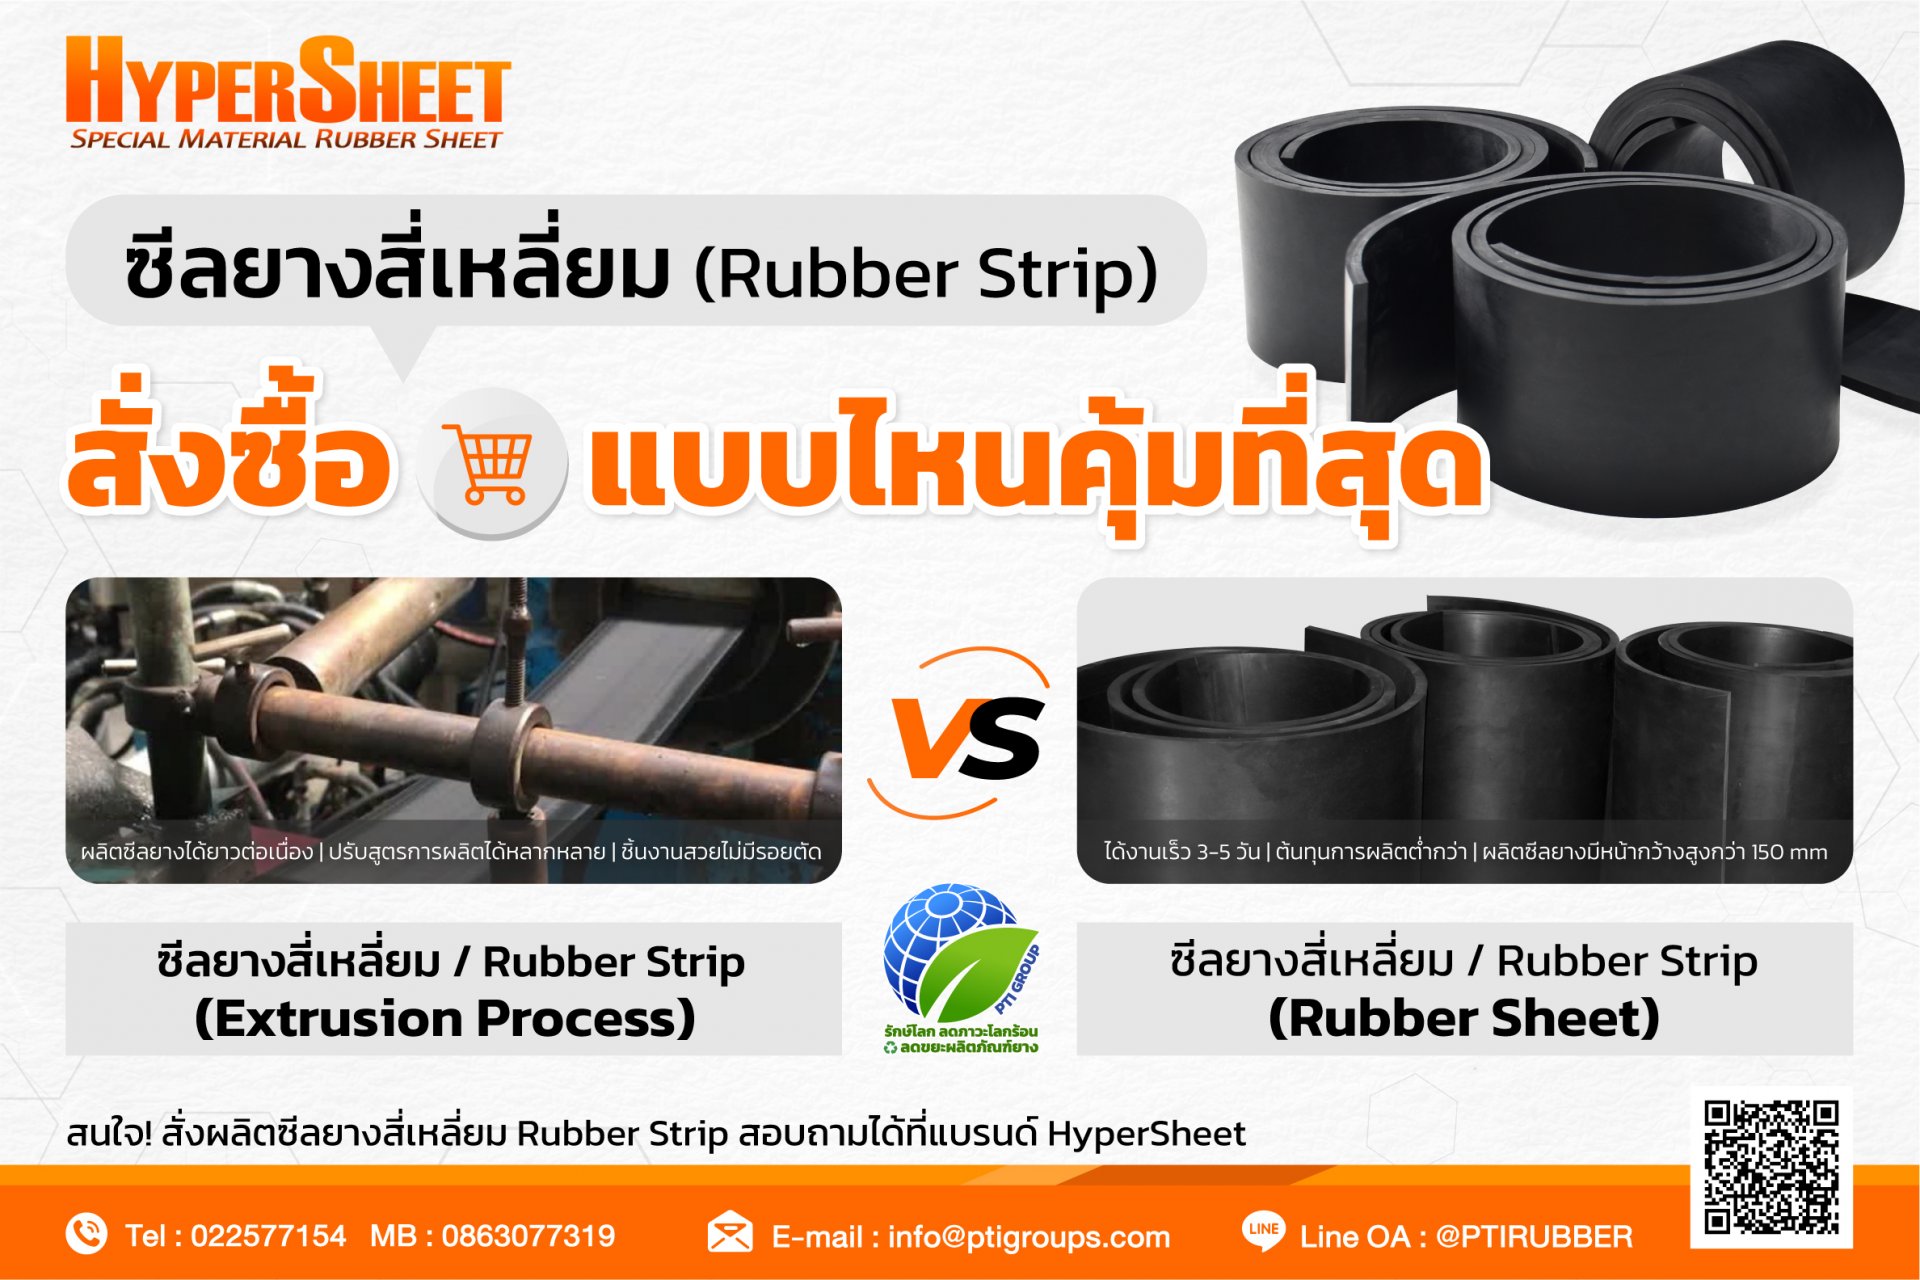 Square rubber seal. Rubber Strip. Which one is the most cost-effective to order?